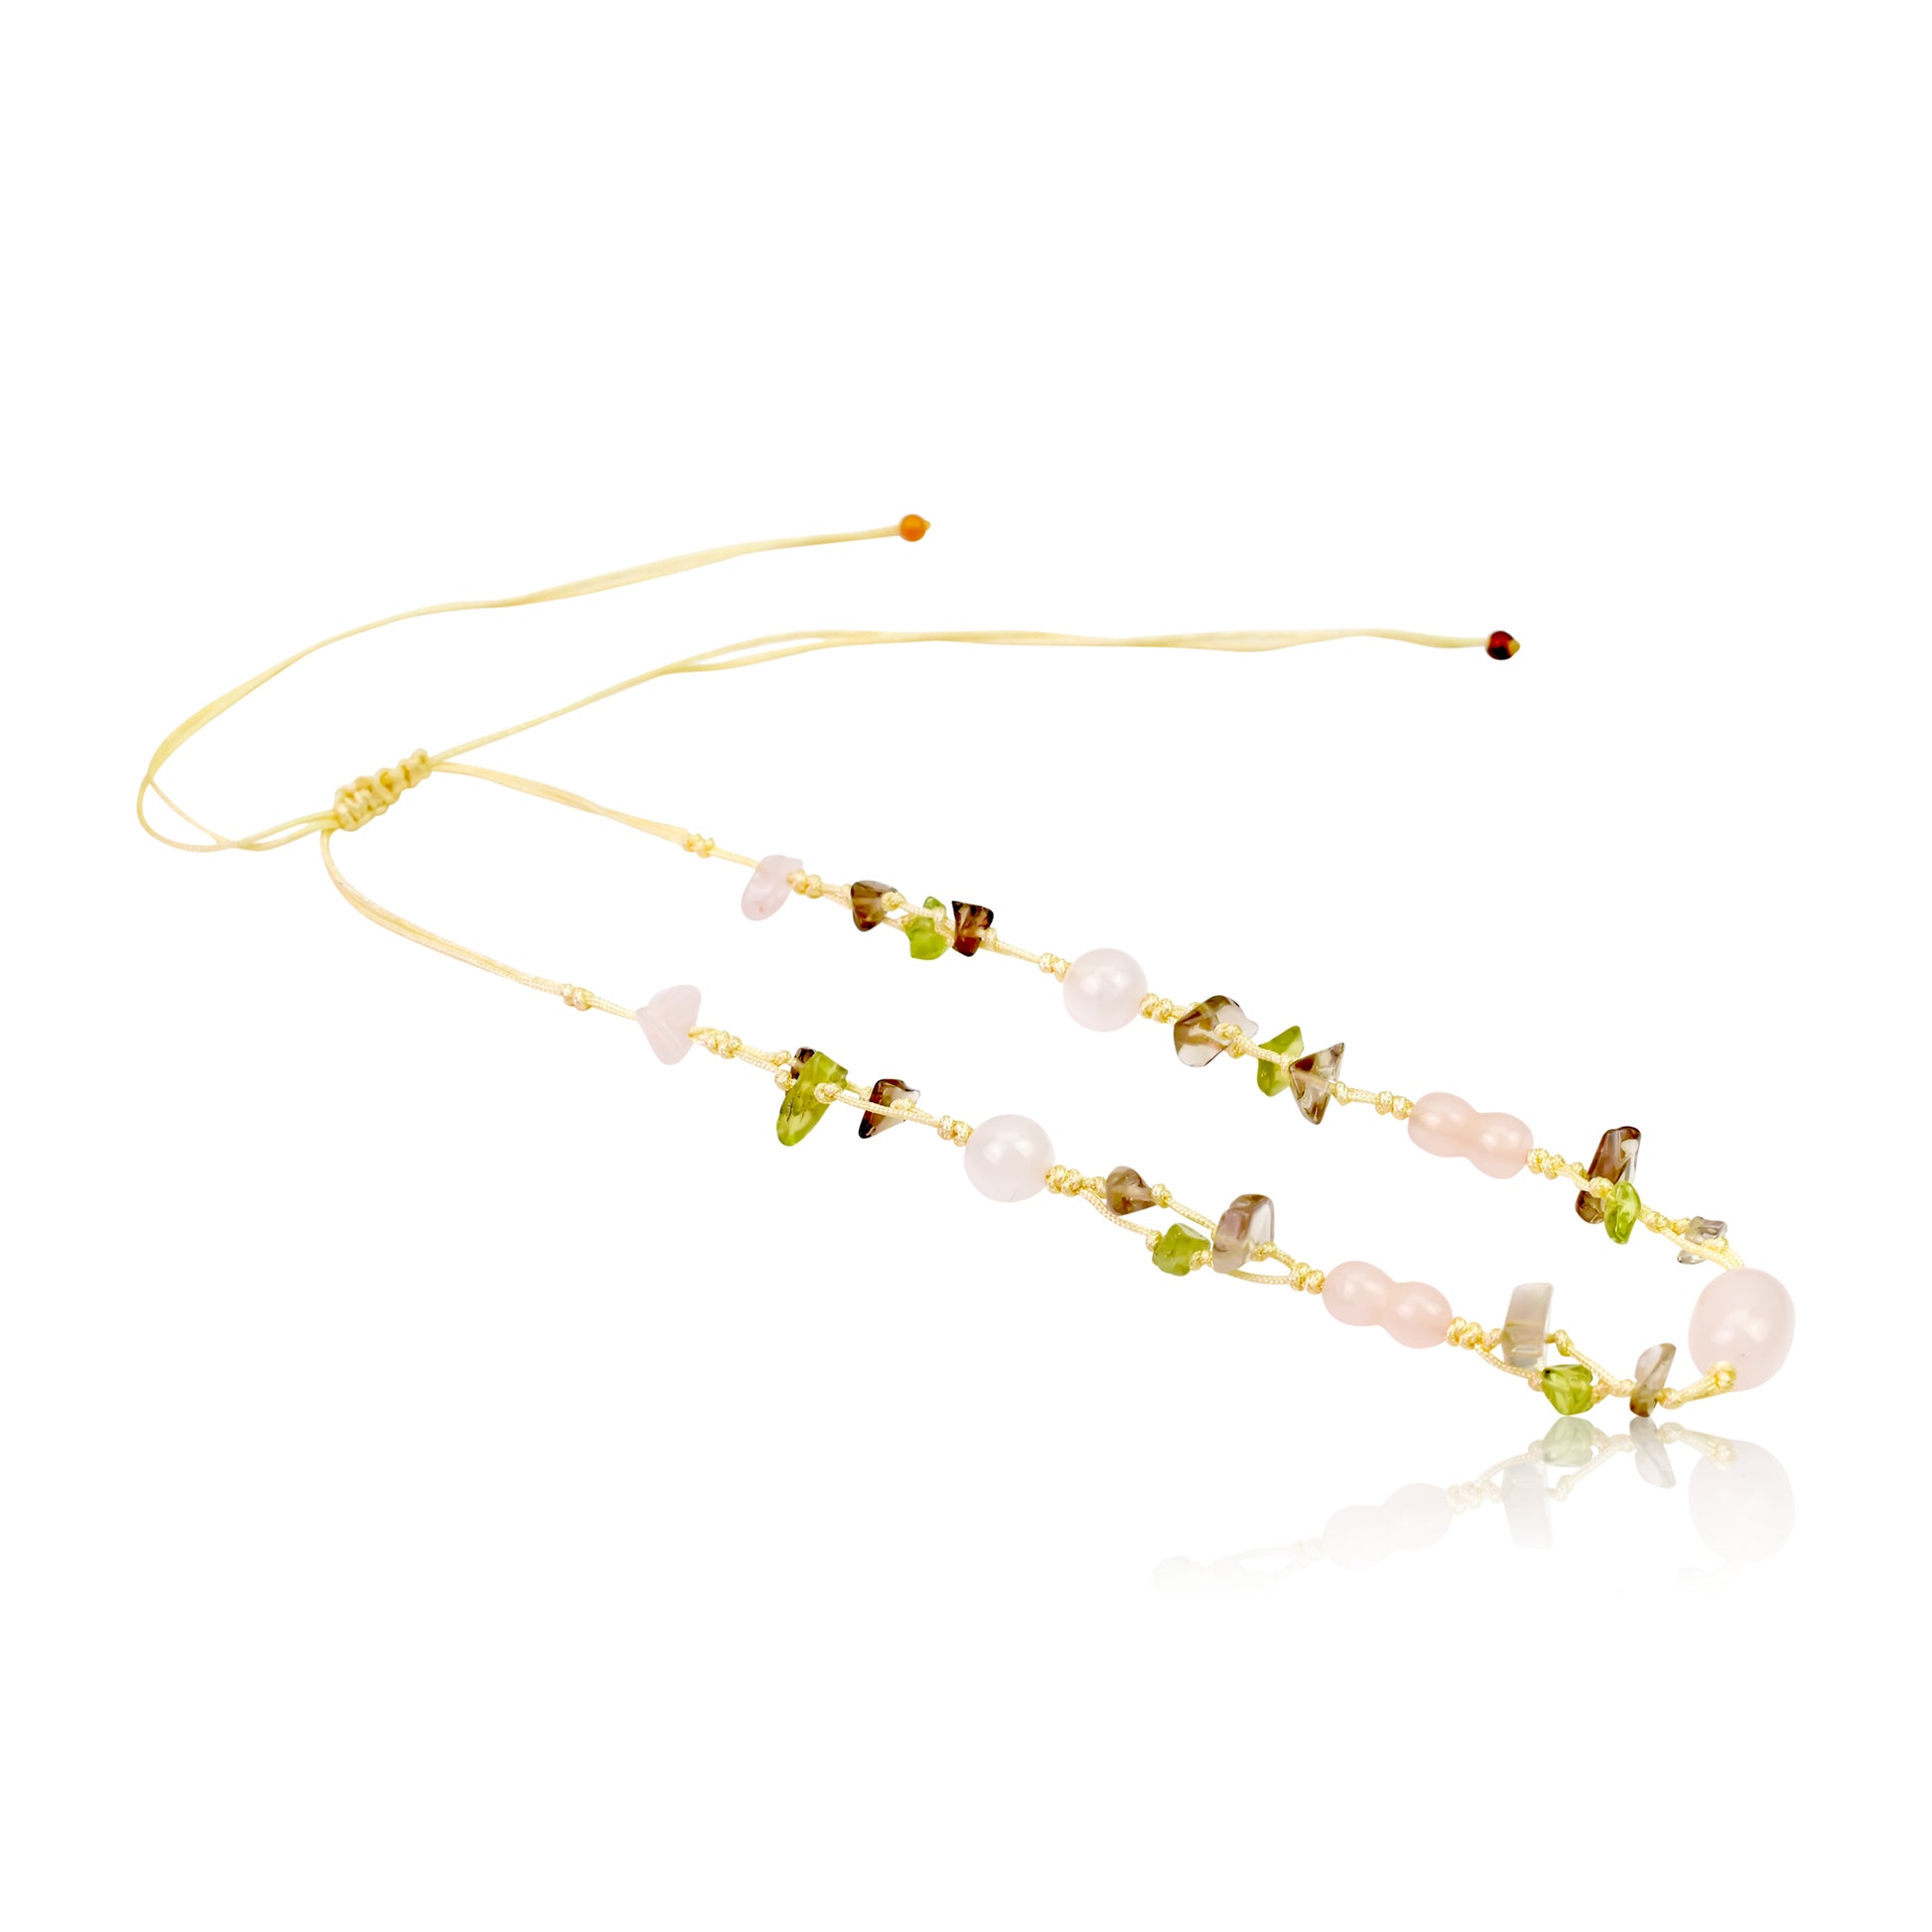 Enhance Your Look with Oval Beads Rose Quartz Gemstones Necklace